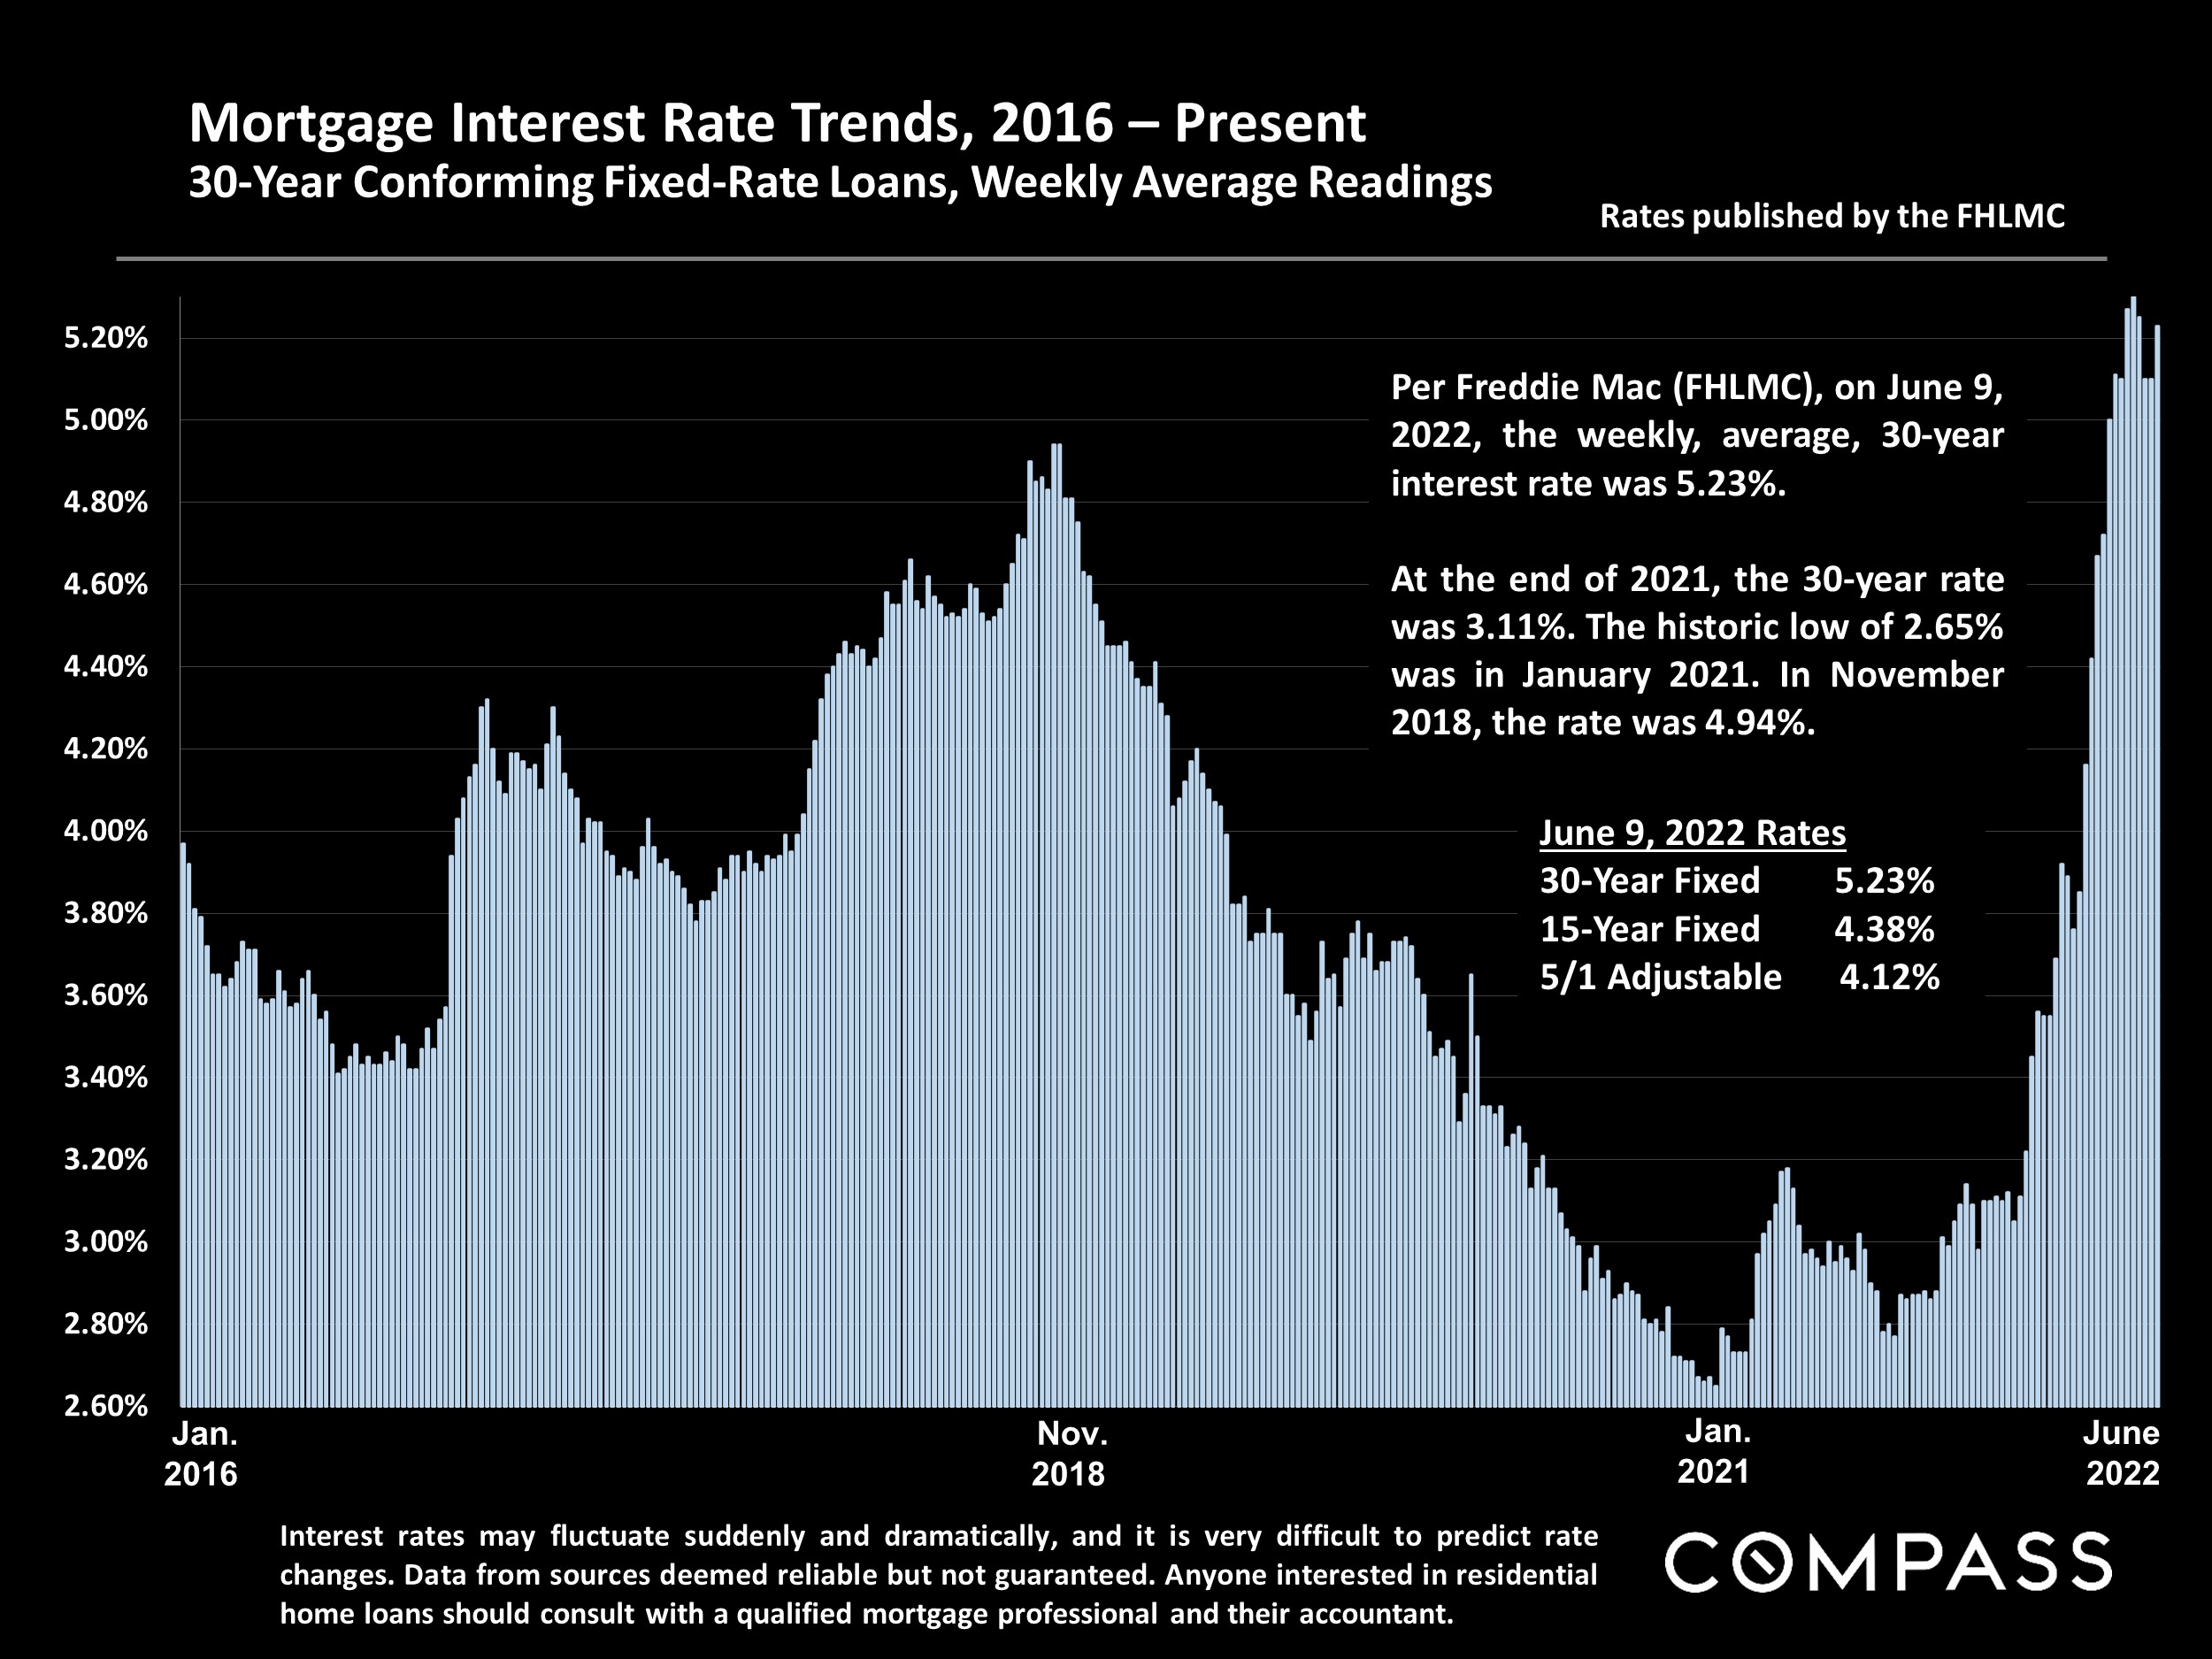 Slide showing montage interest rate trends from 2016 to present